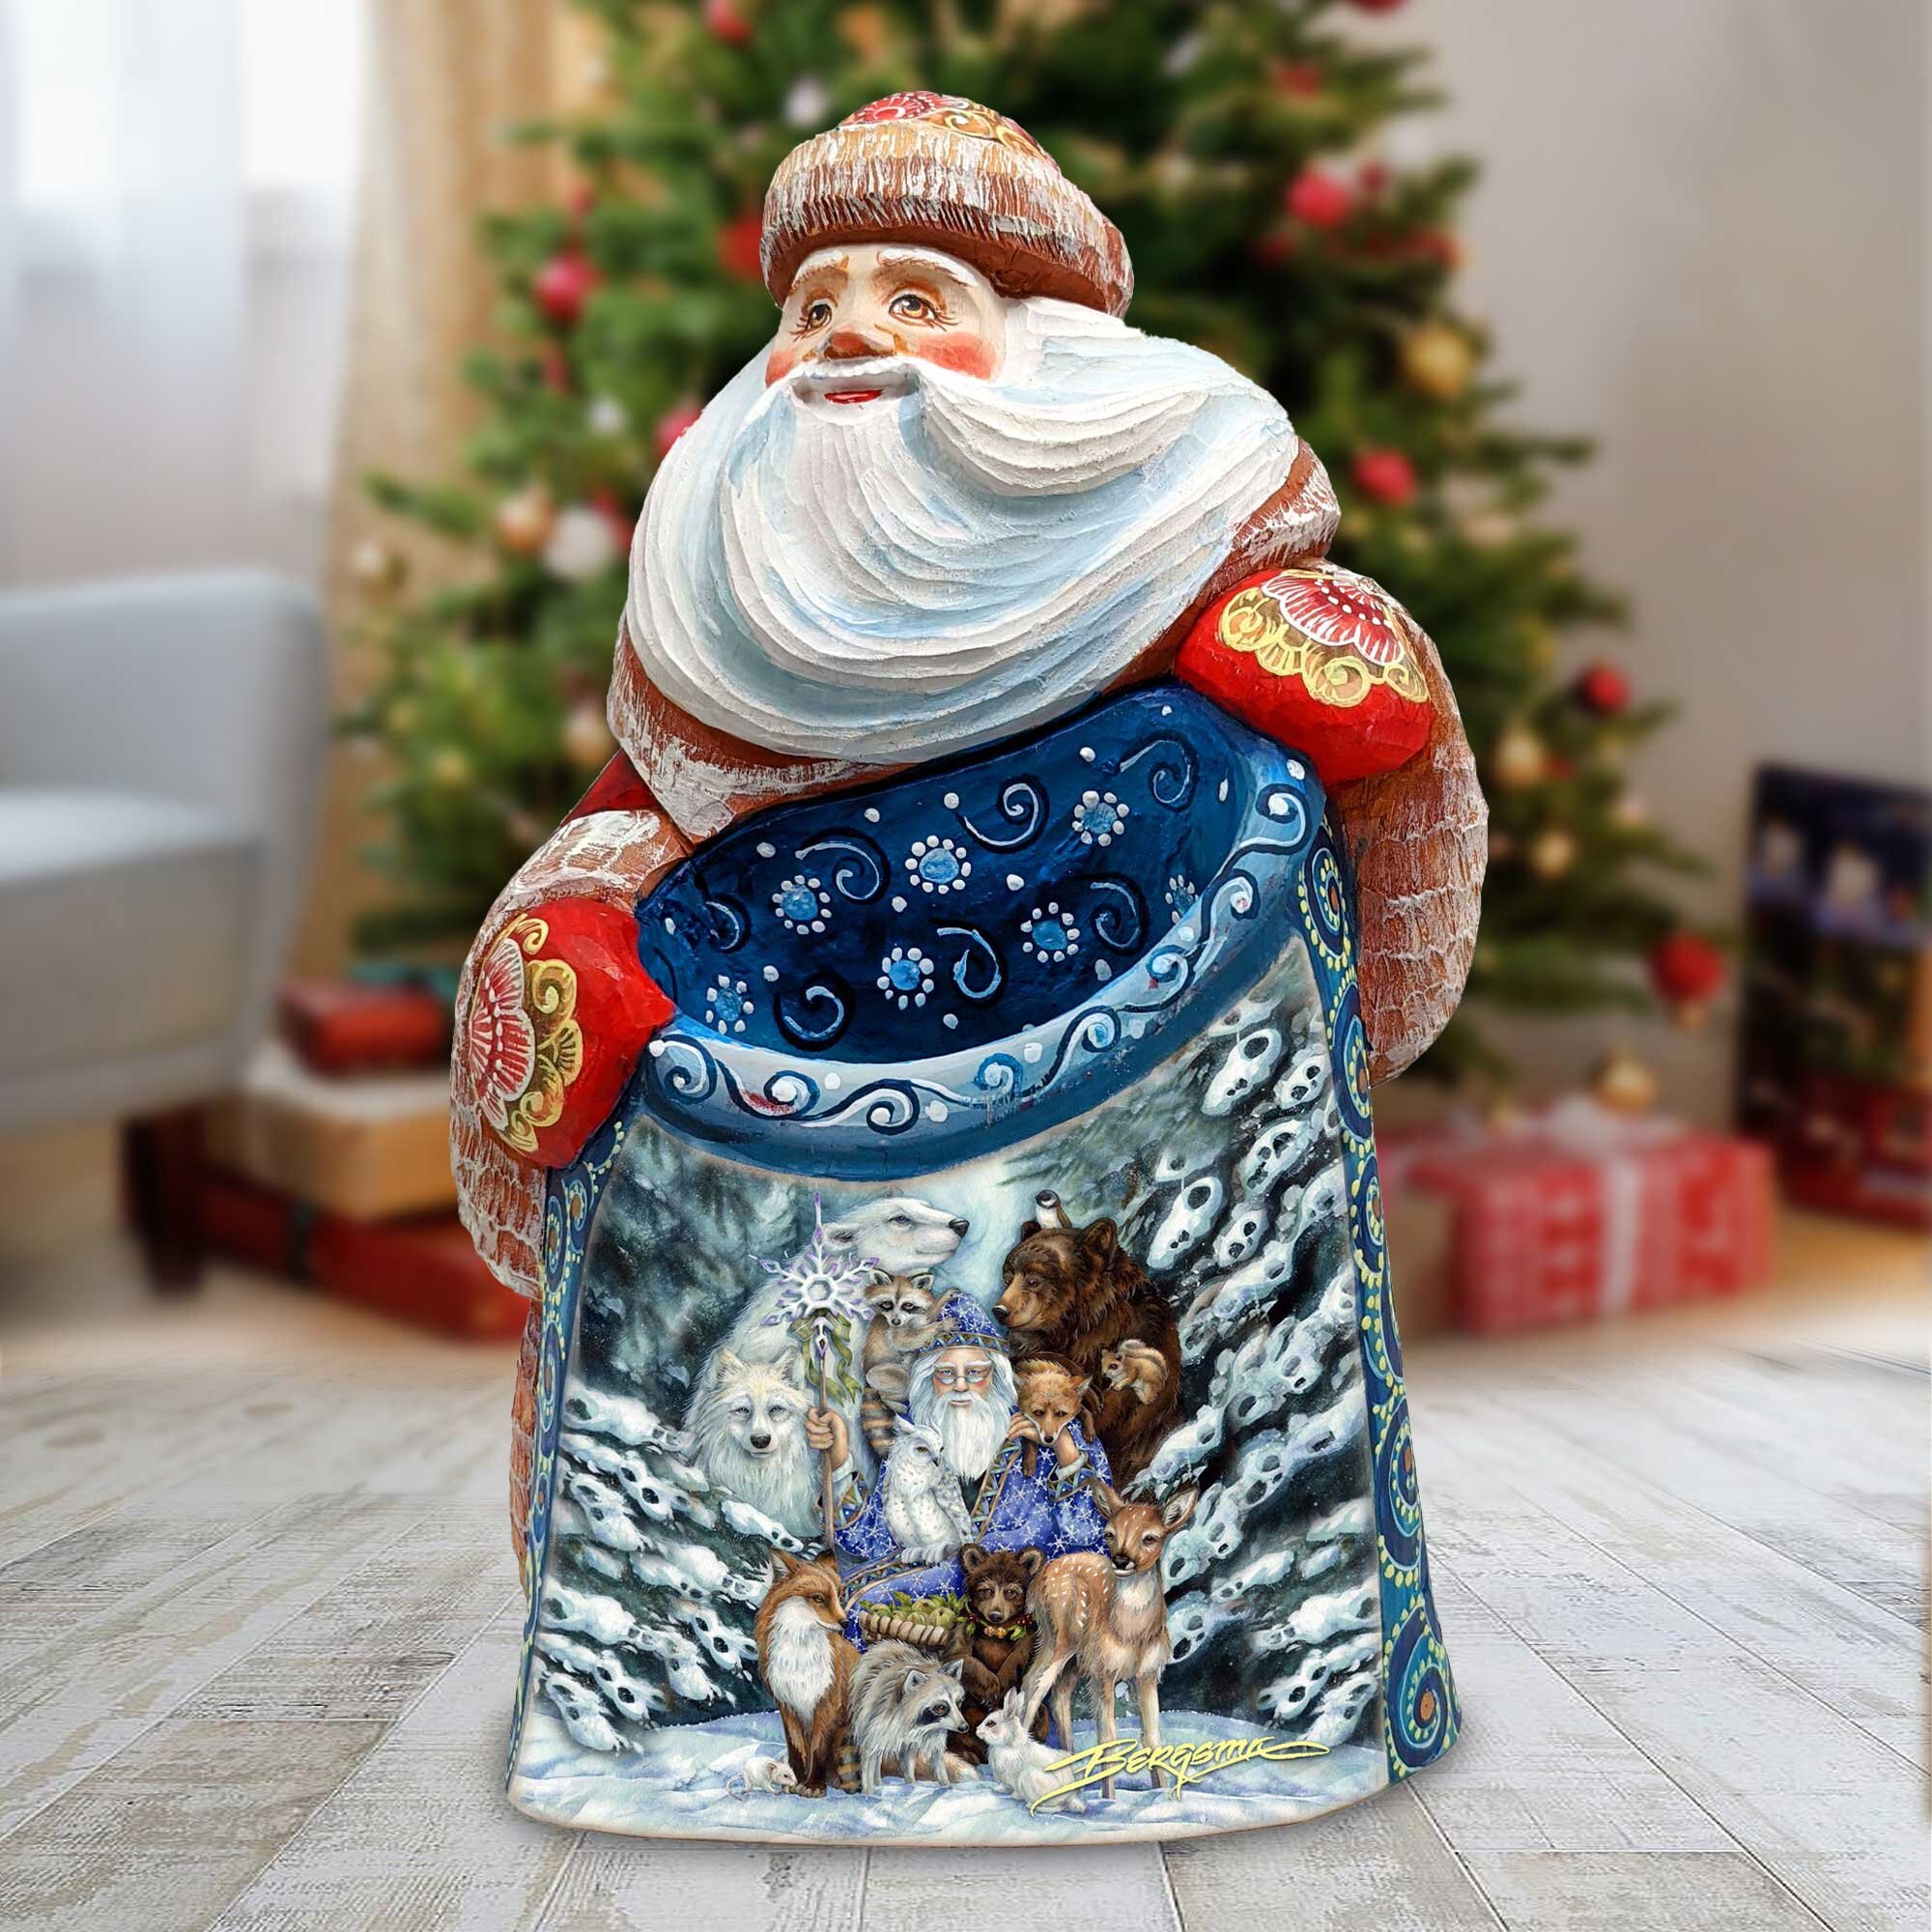 Wood carving  Santa Claus  wood figurine   Christmas  tree   Ornament  Decoration gift